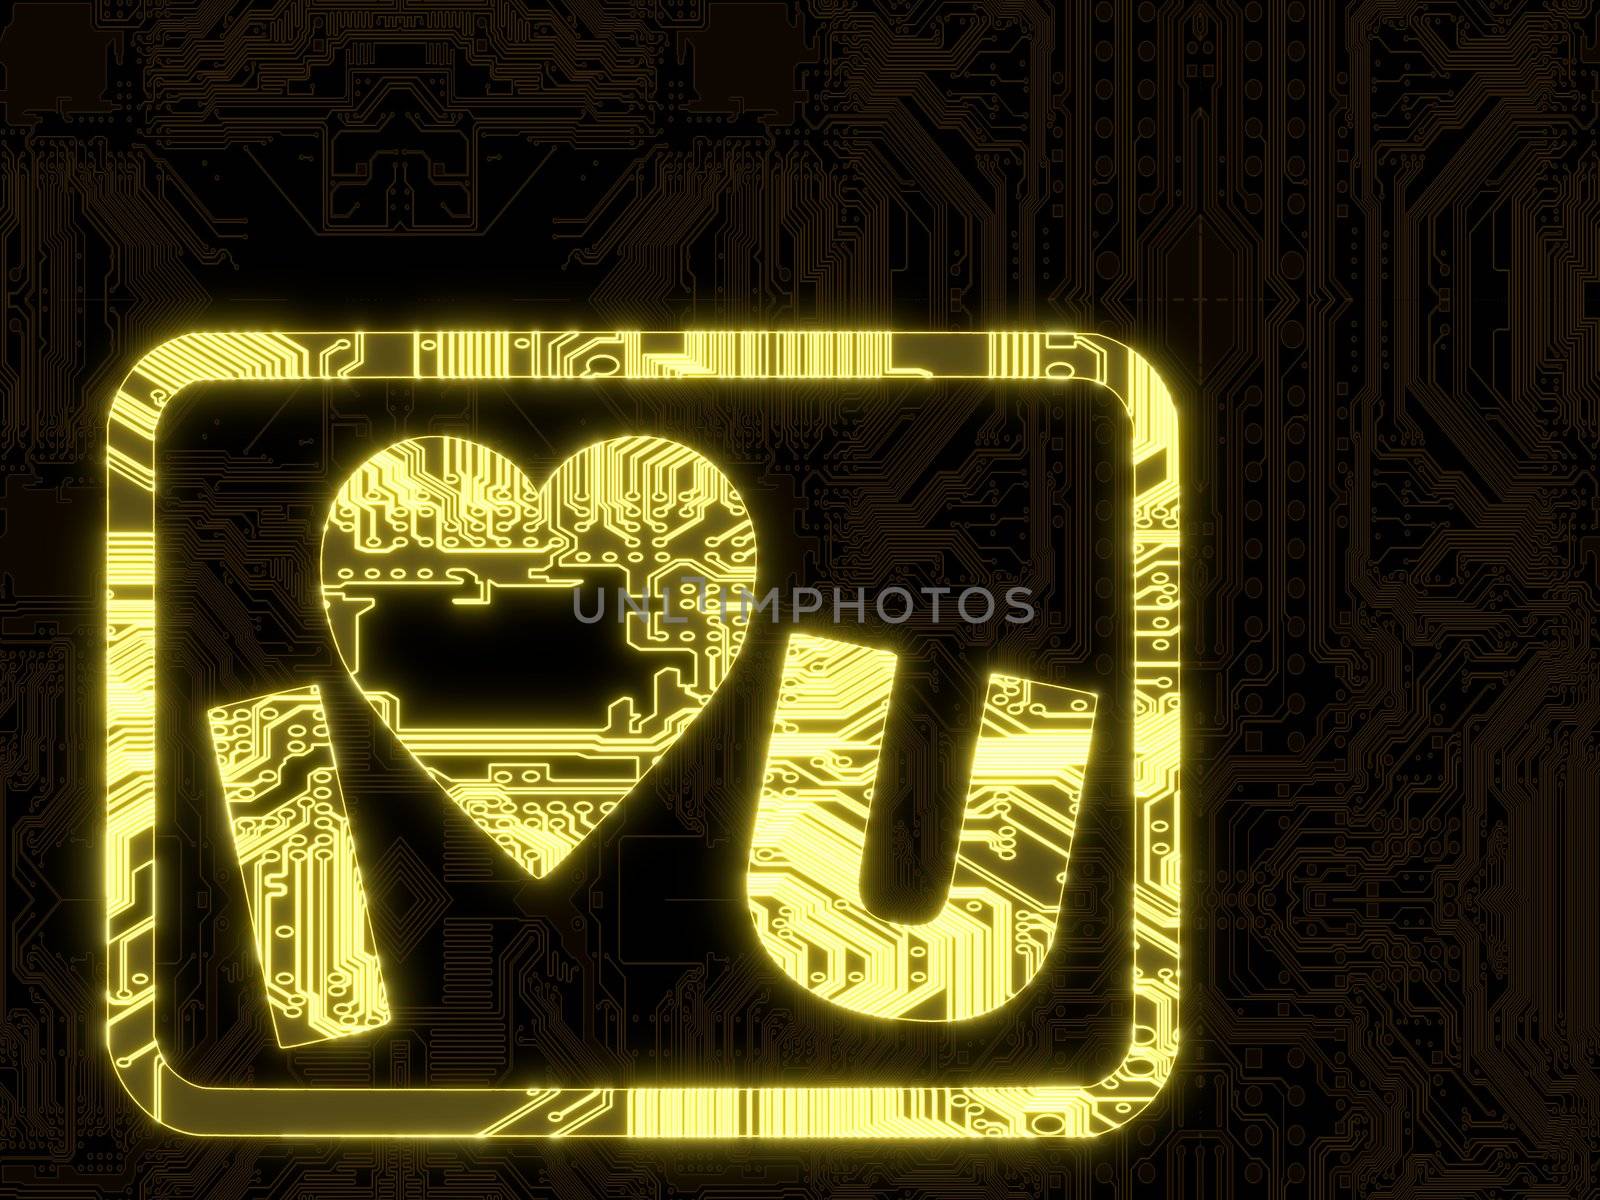 3D Graphic flare with I love you symbol on a computer chip